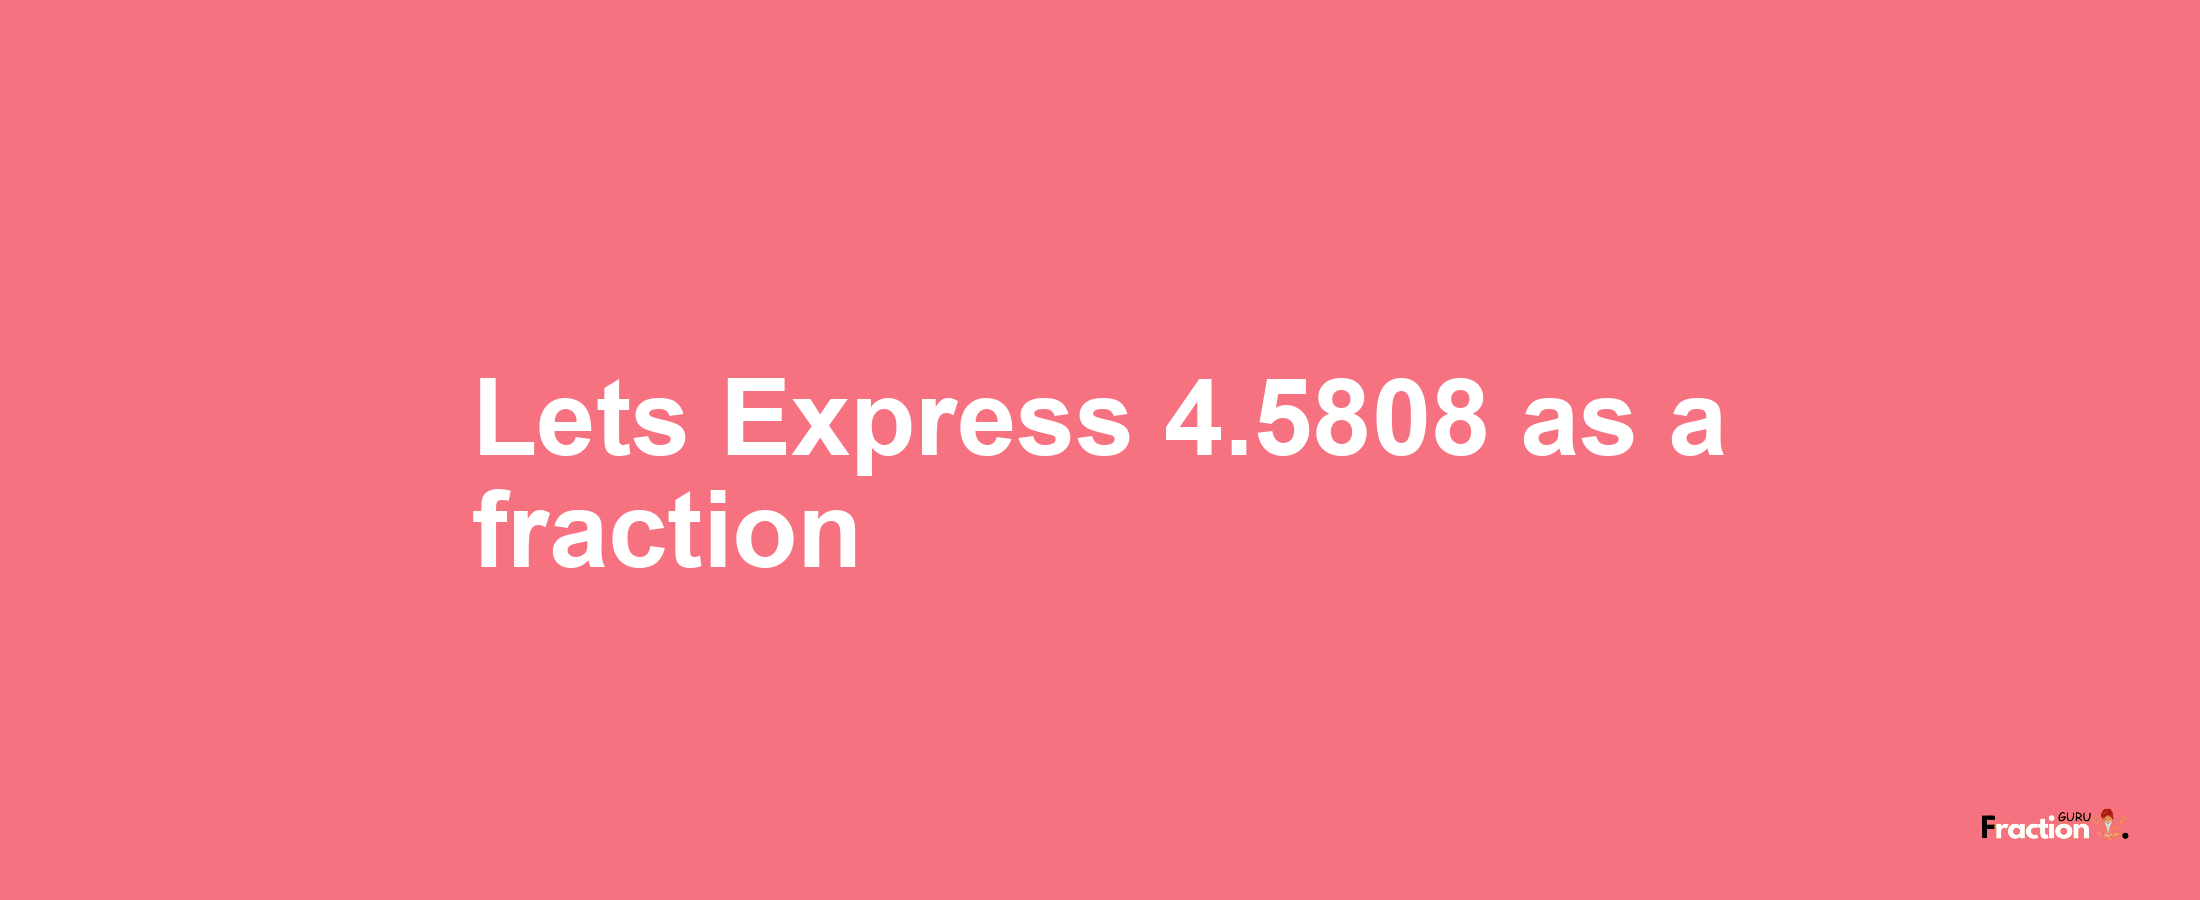 Lets Express 4.5808 as afraction